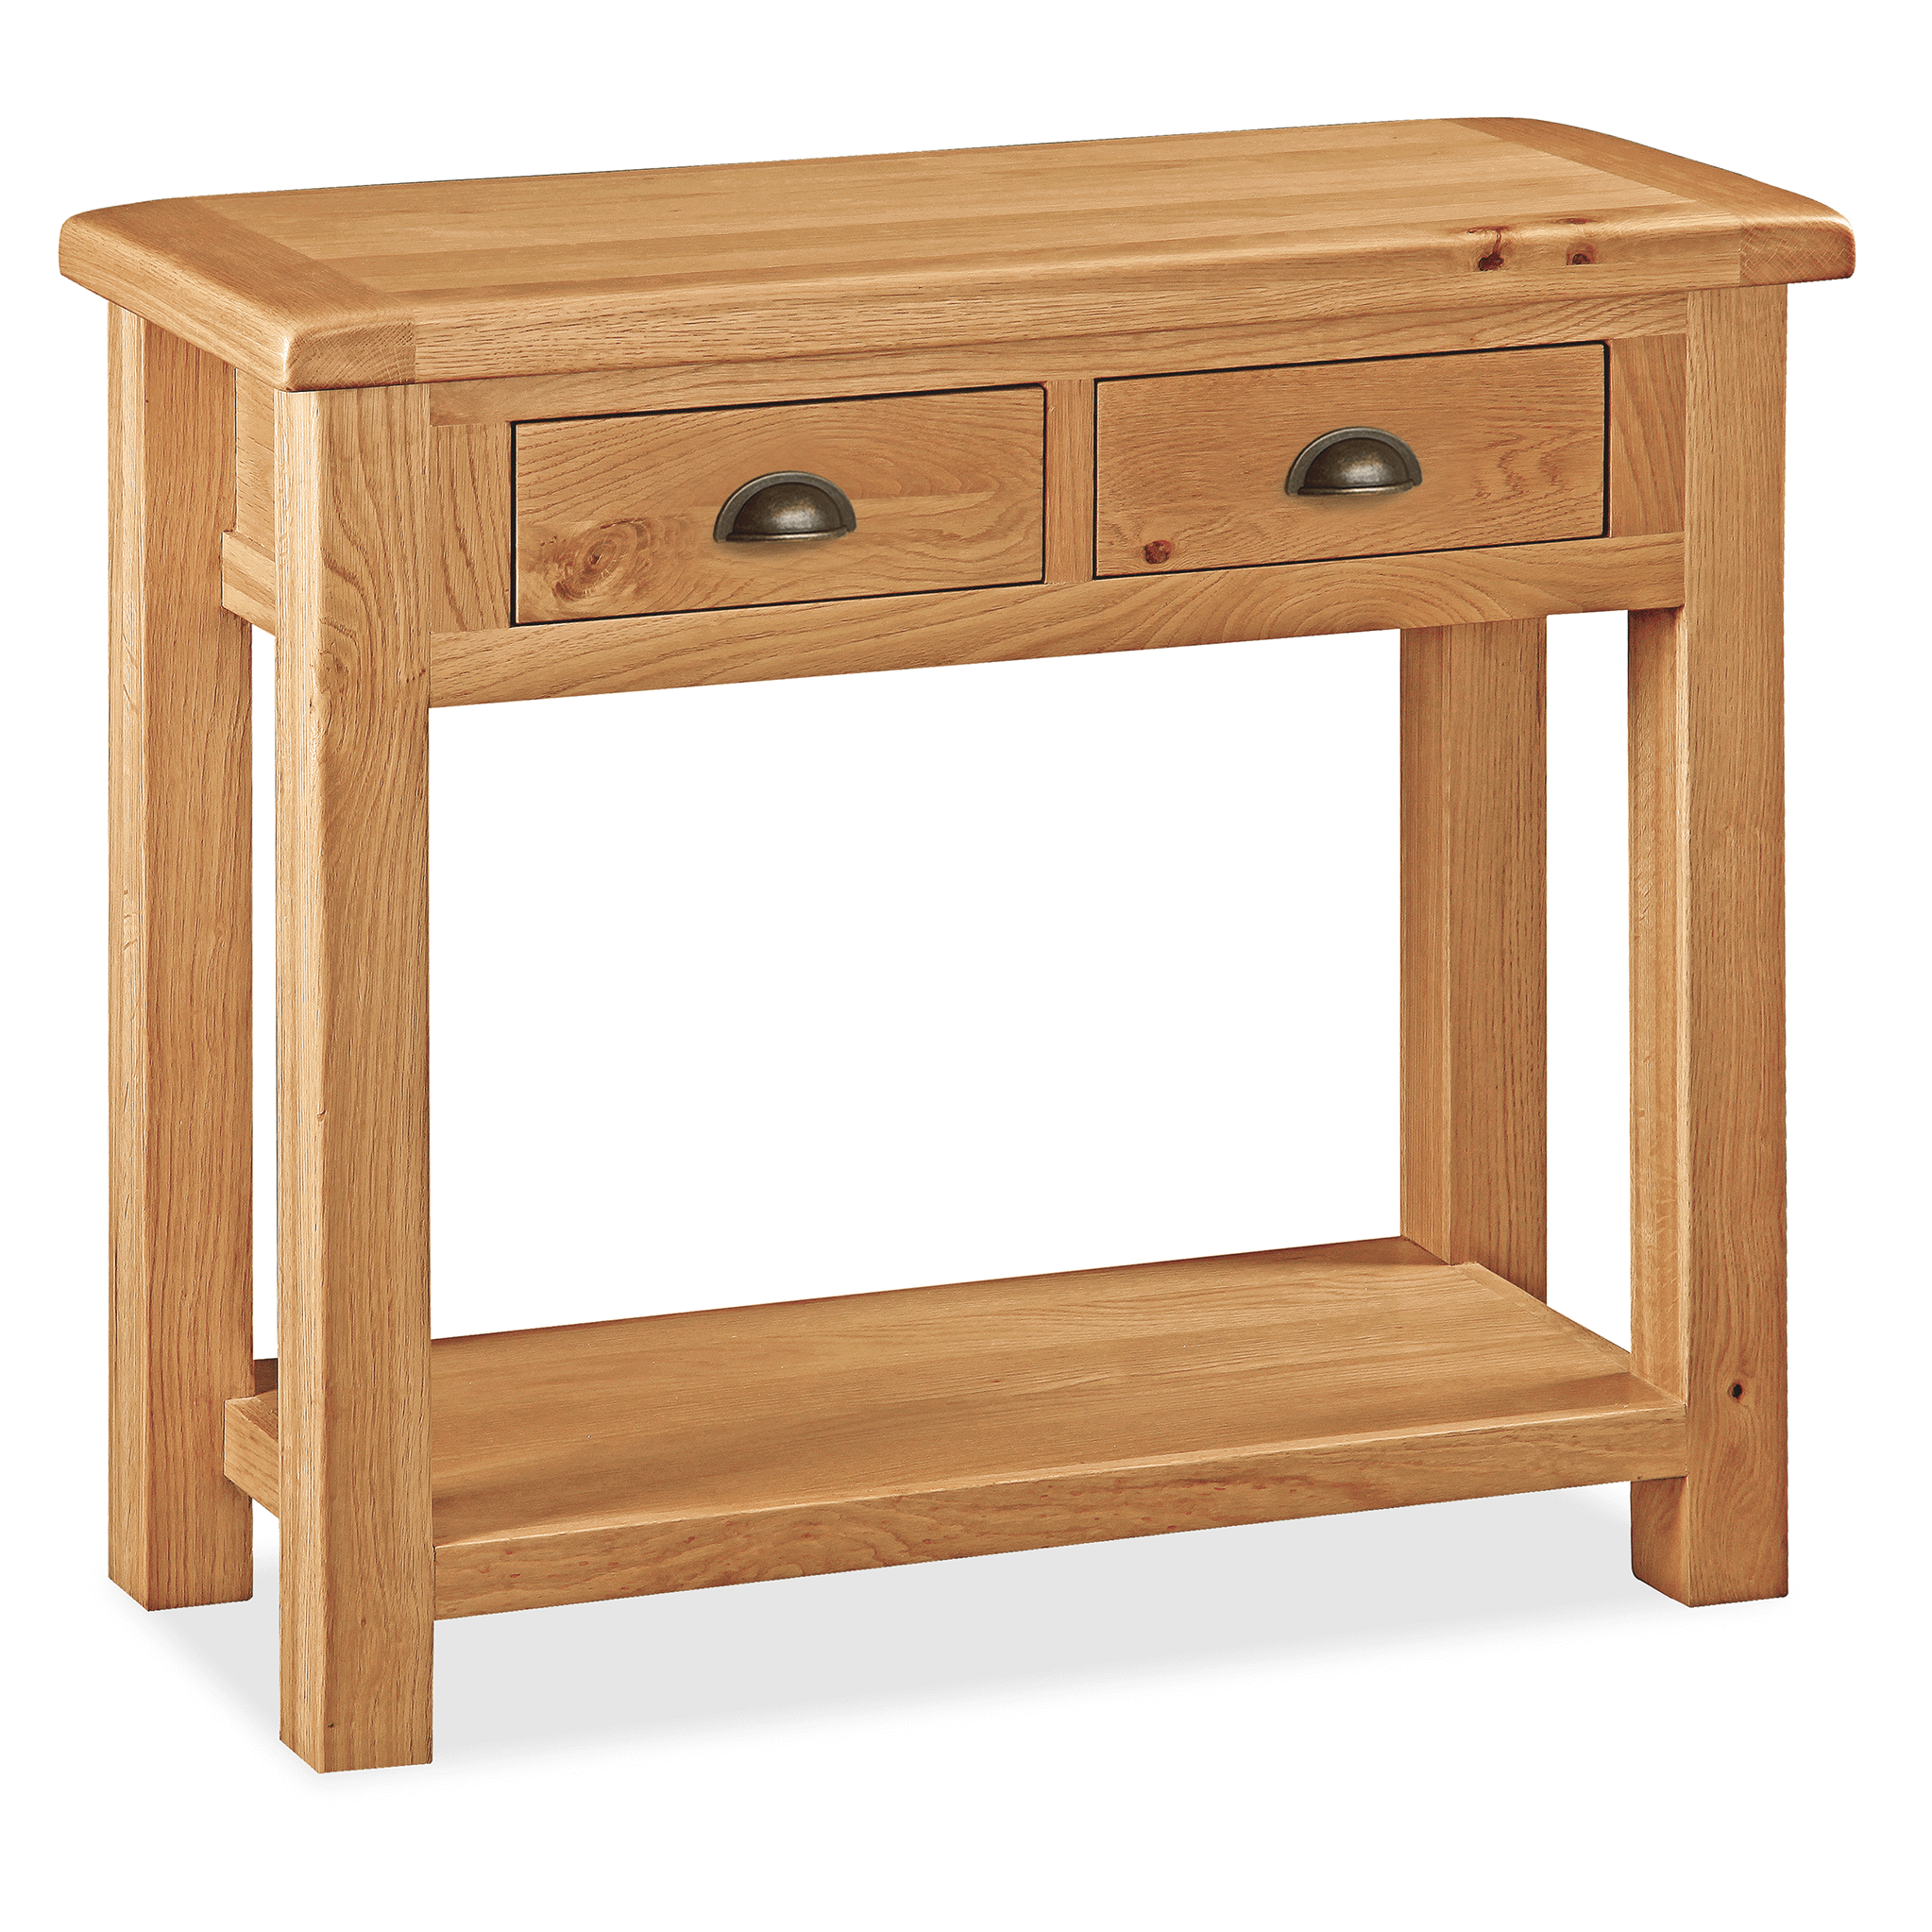 Sidmouth Oak Console Table